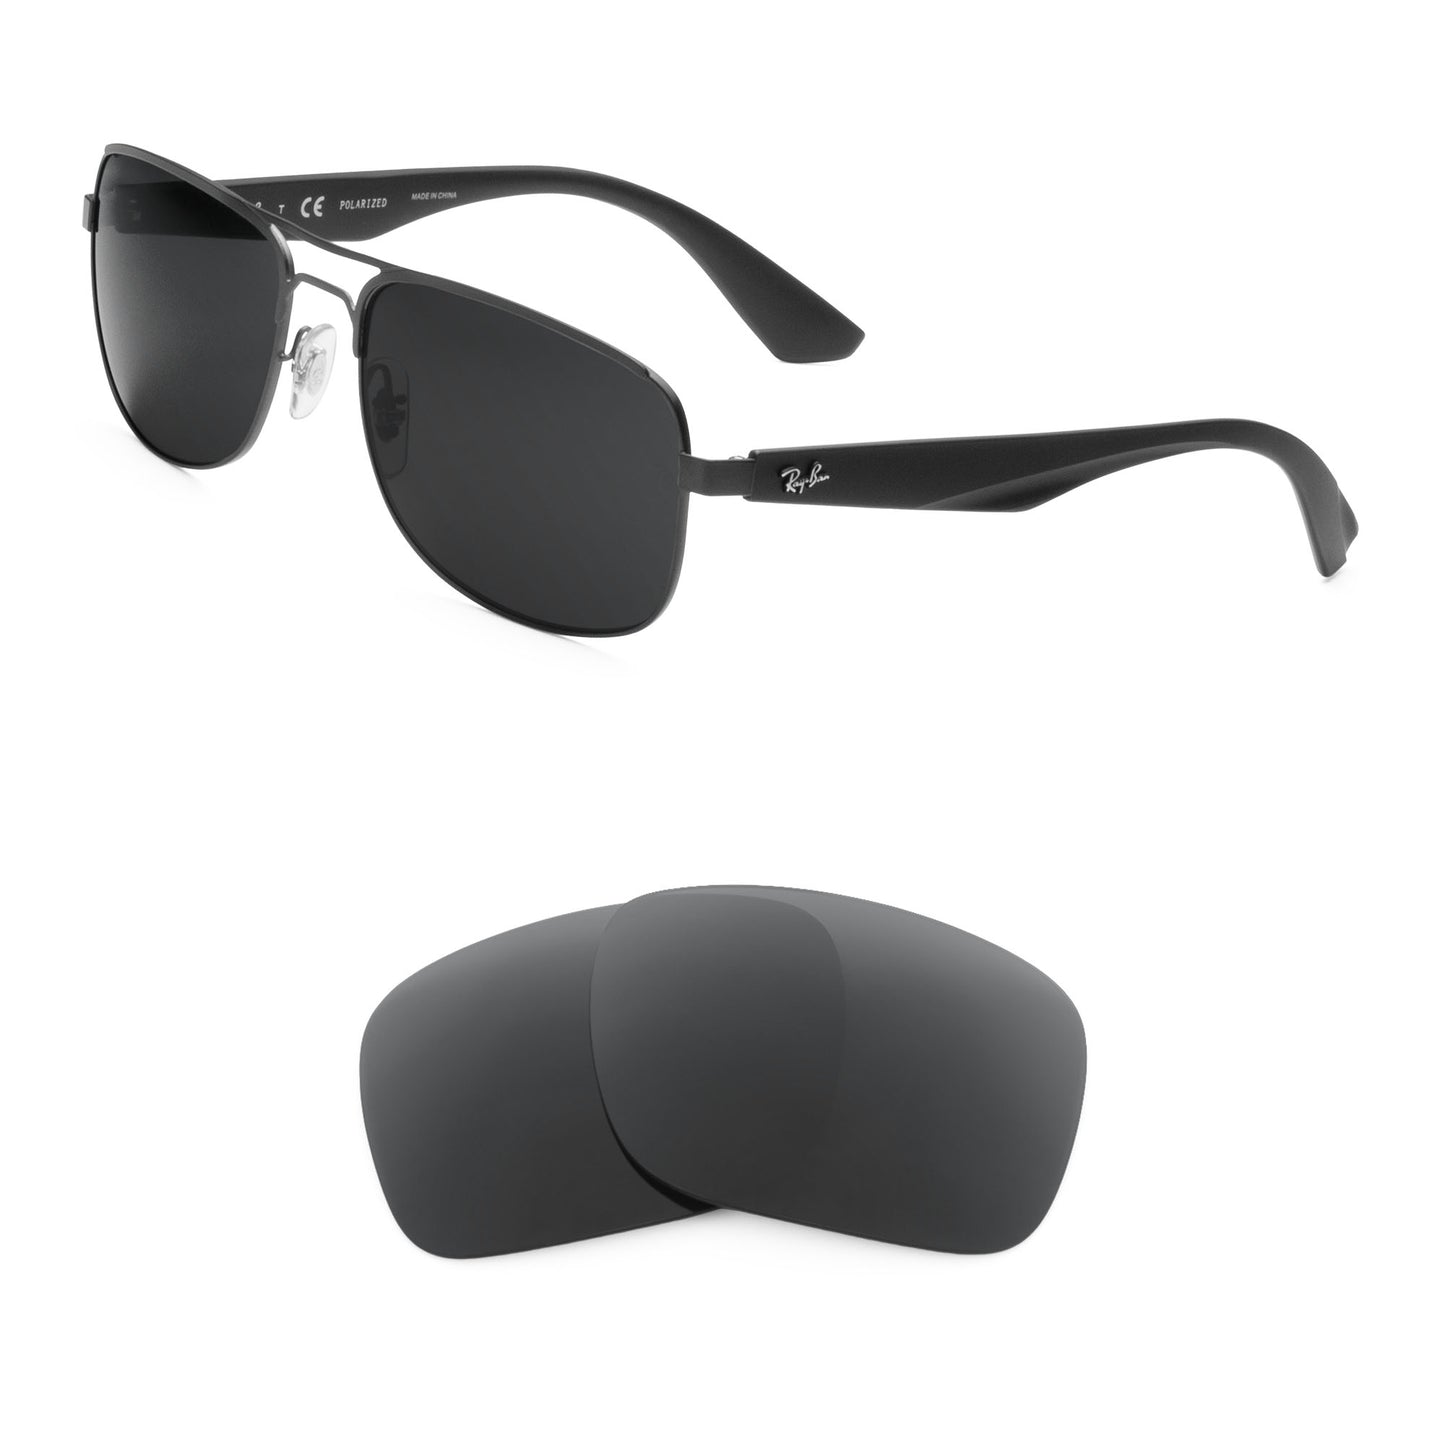 Ray-Ban RB3524 57mm sunglasses with replacement lenses